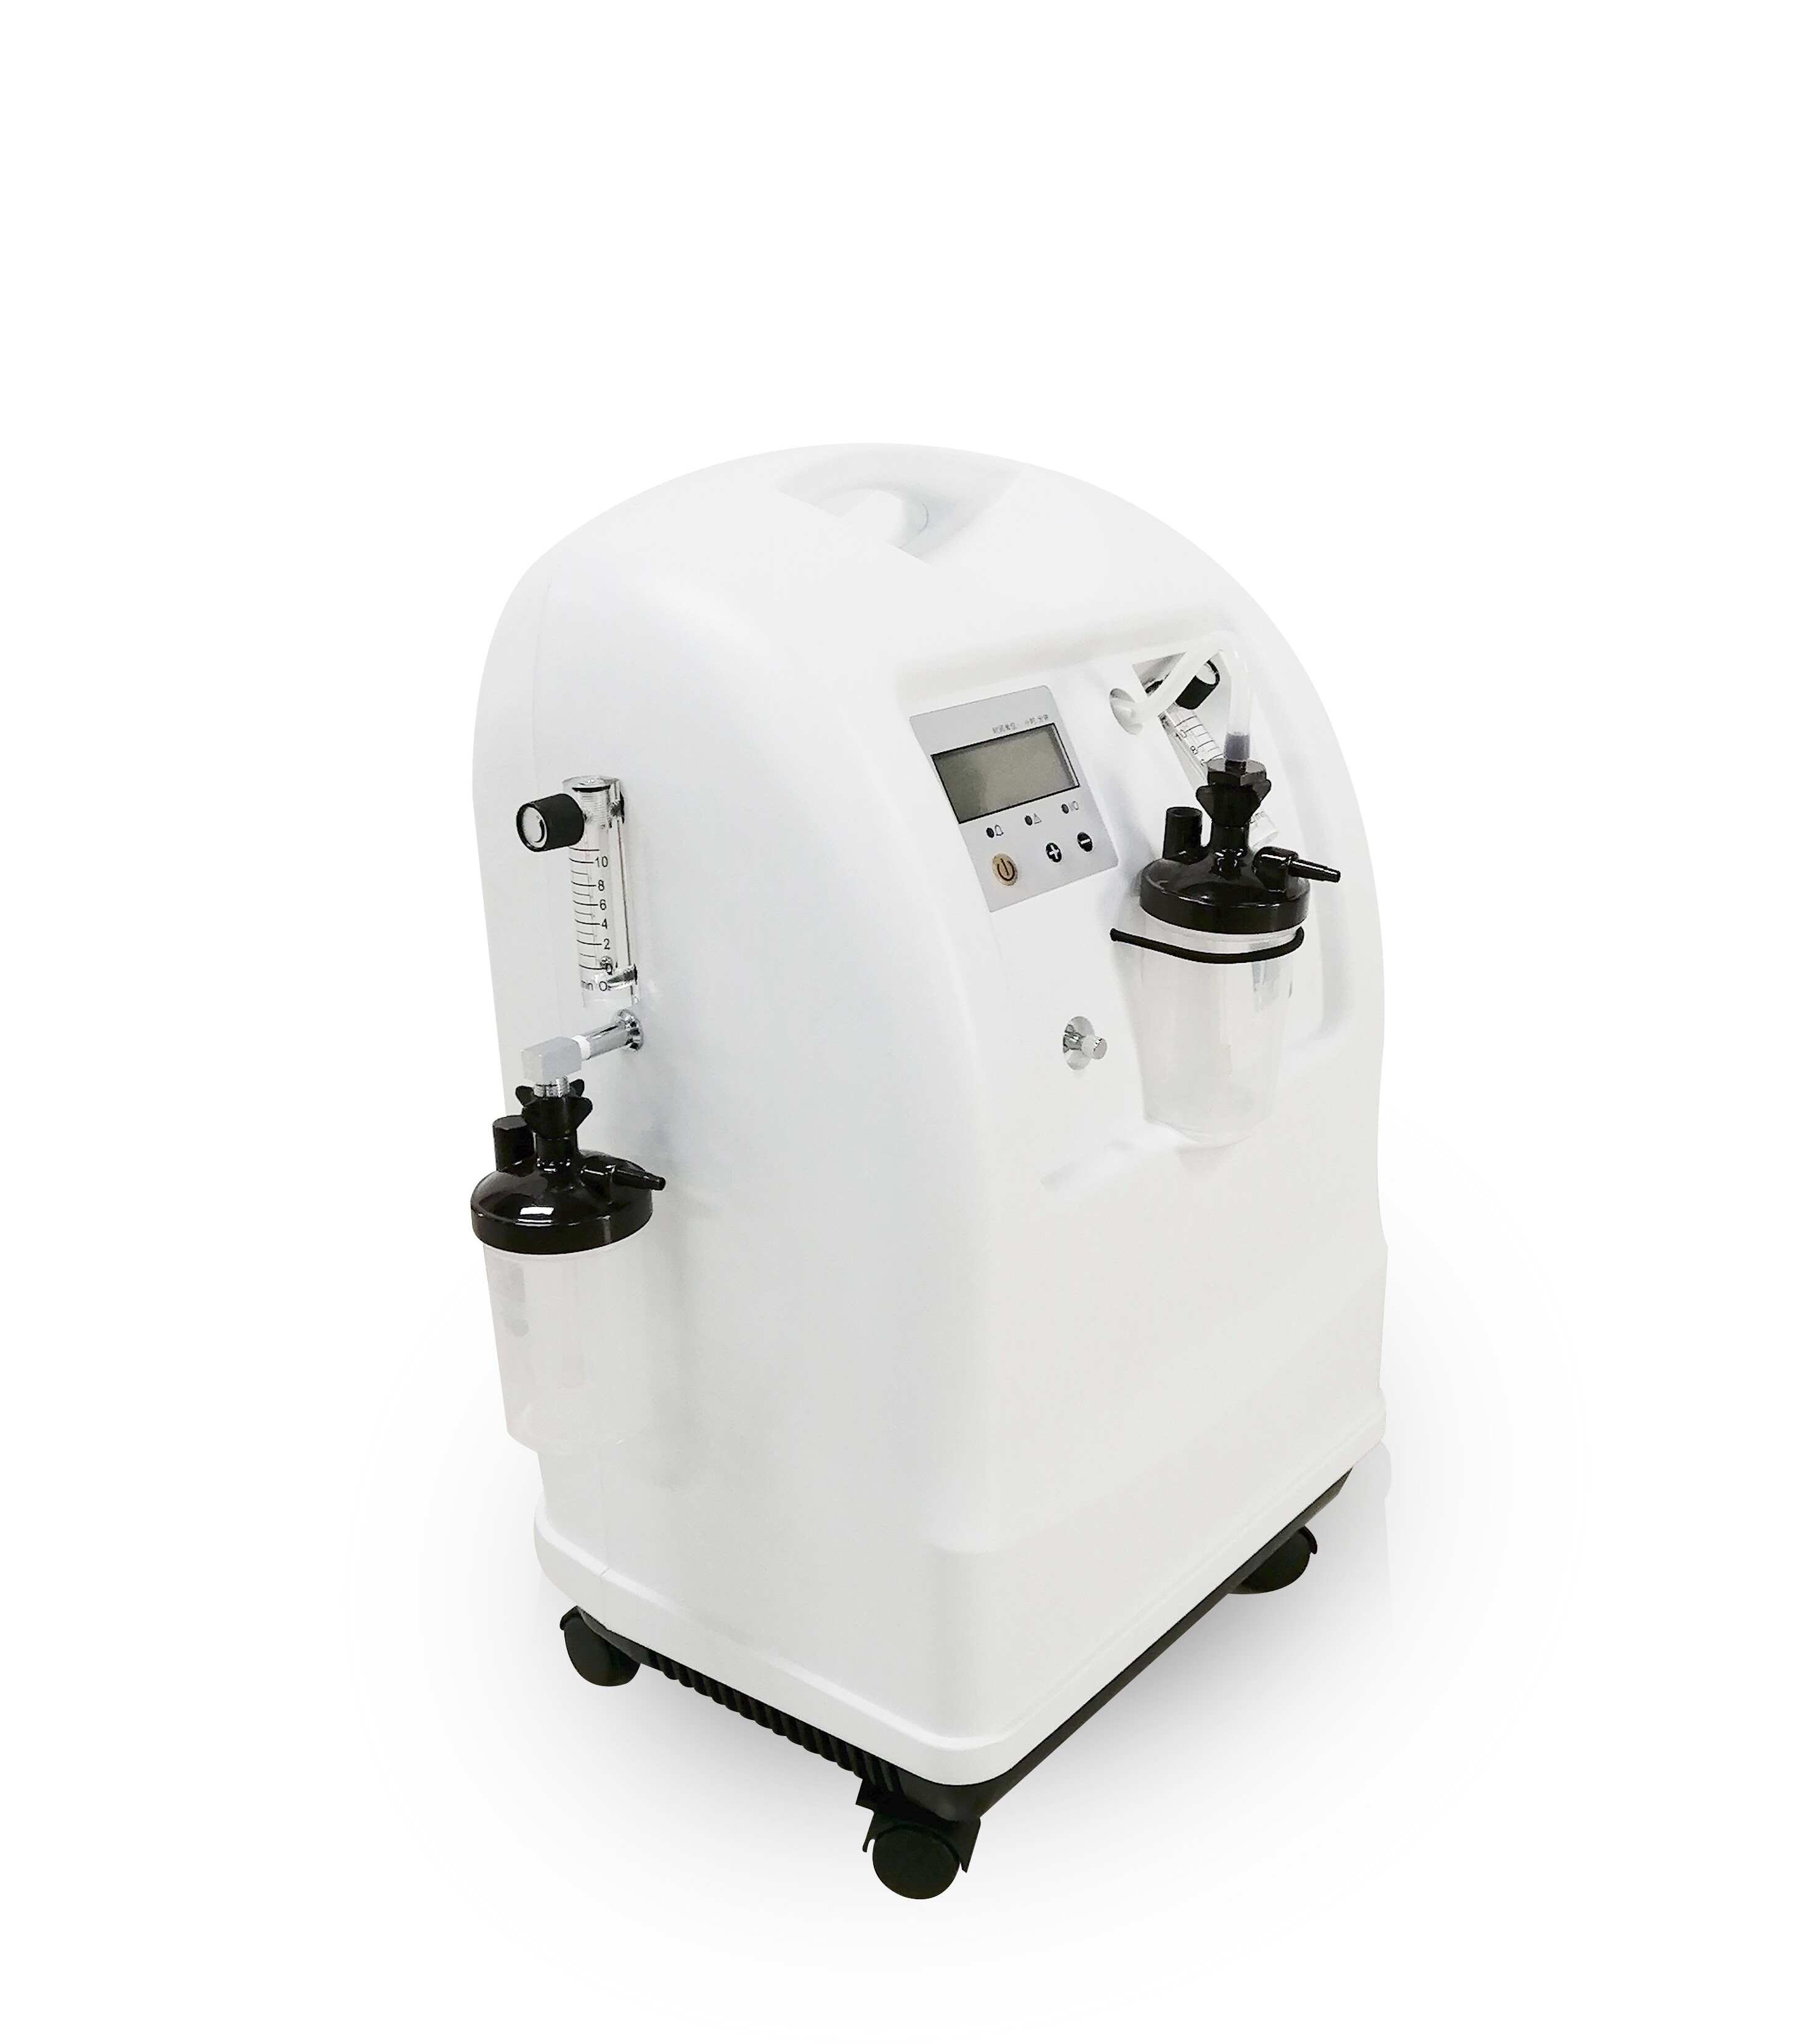 Some caution tips for oxygen concentrator